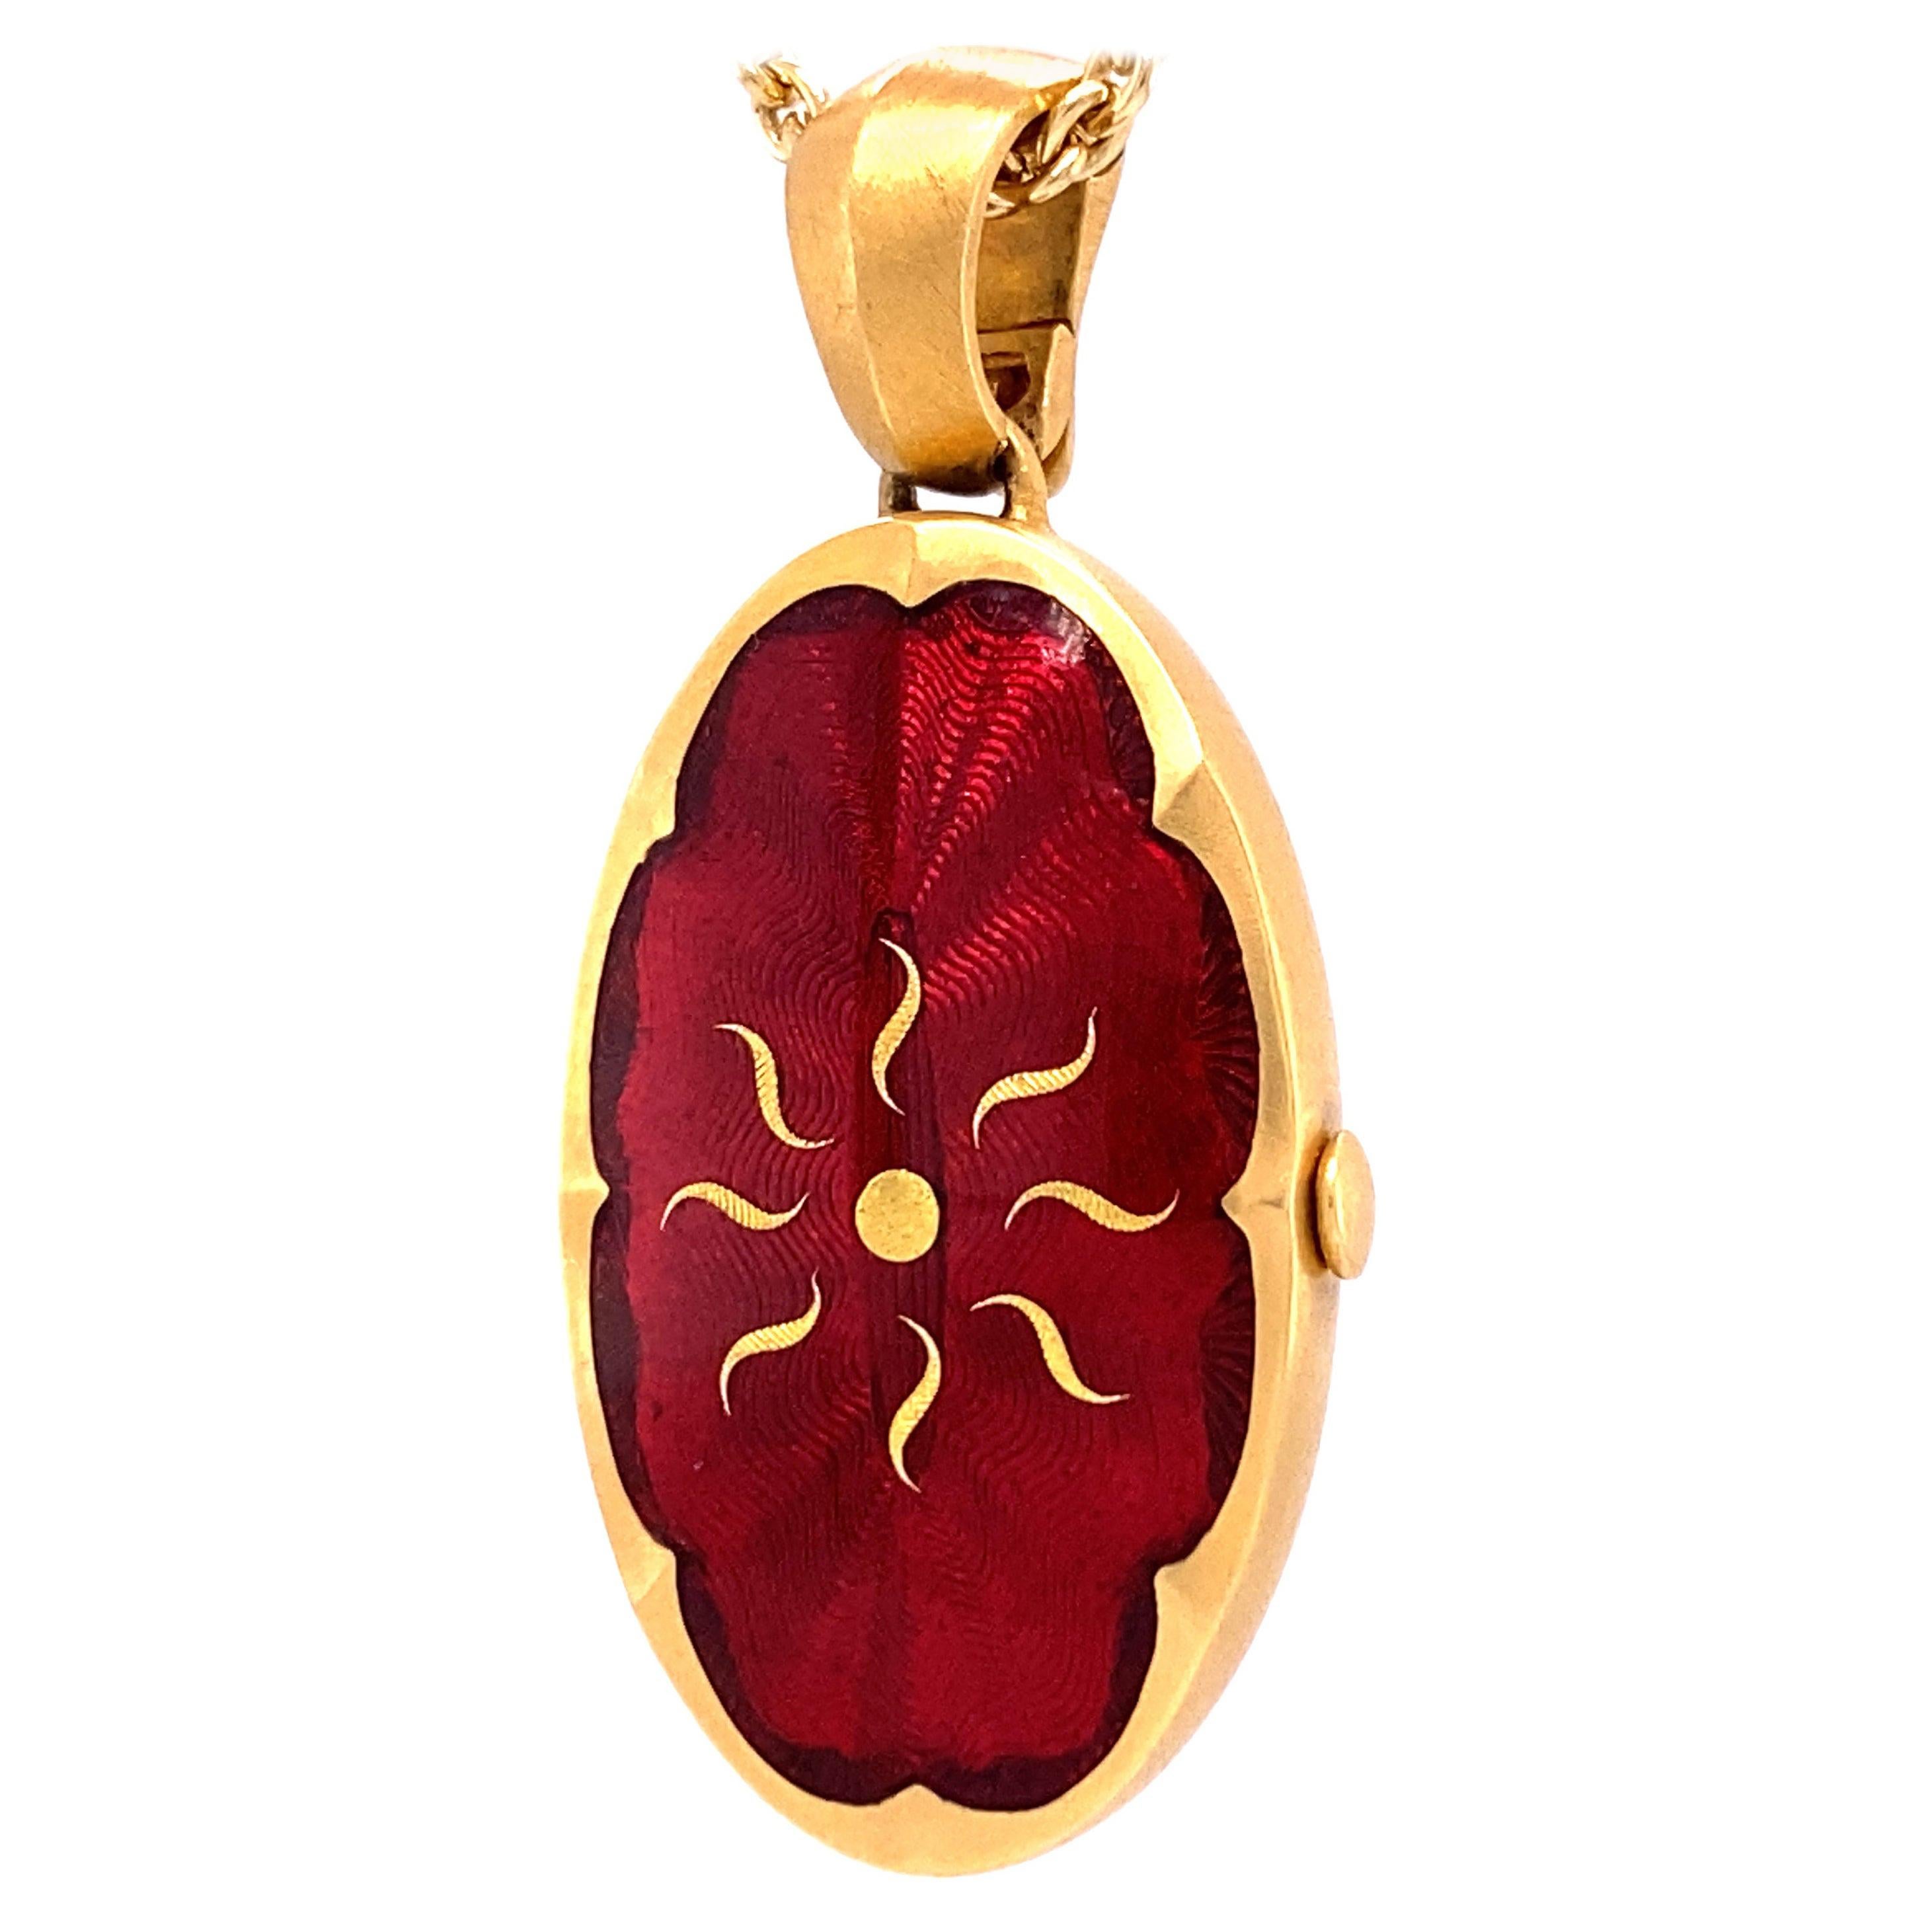 Oval Pendant Locket Necklace - 18k Yellow Gold - Red Guilloche Enamel Paillons